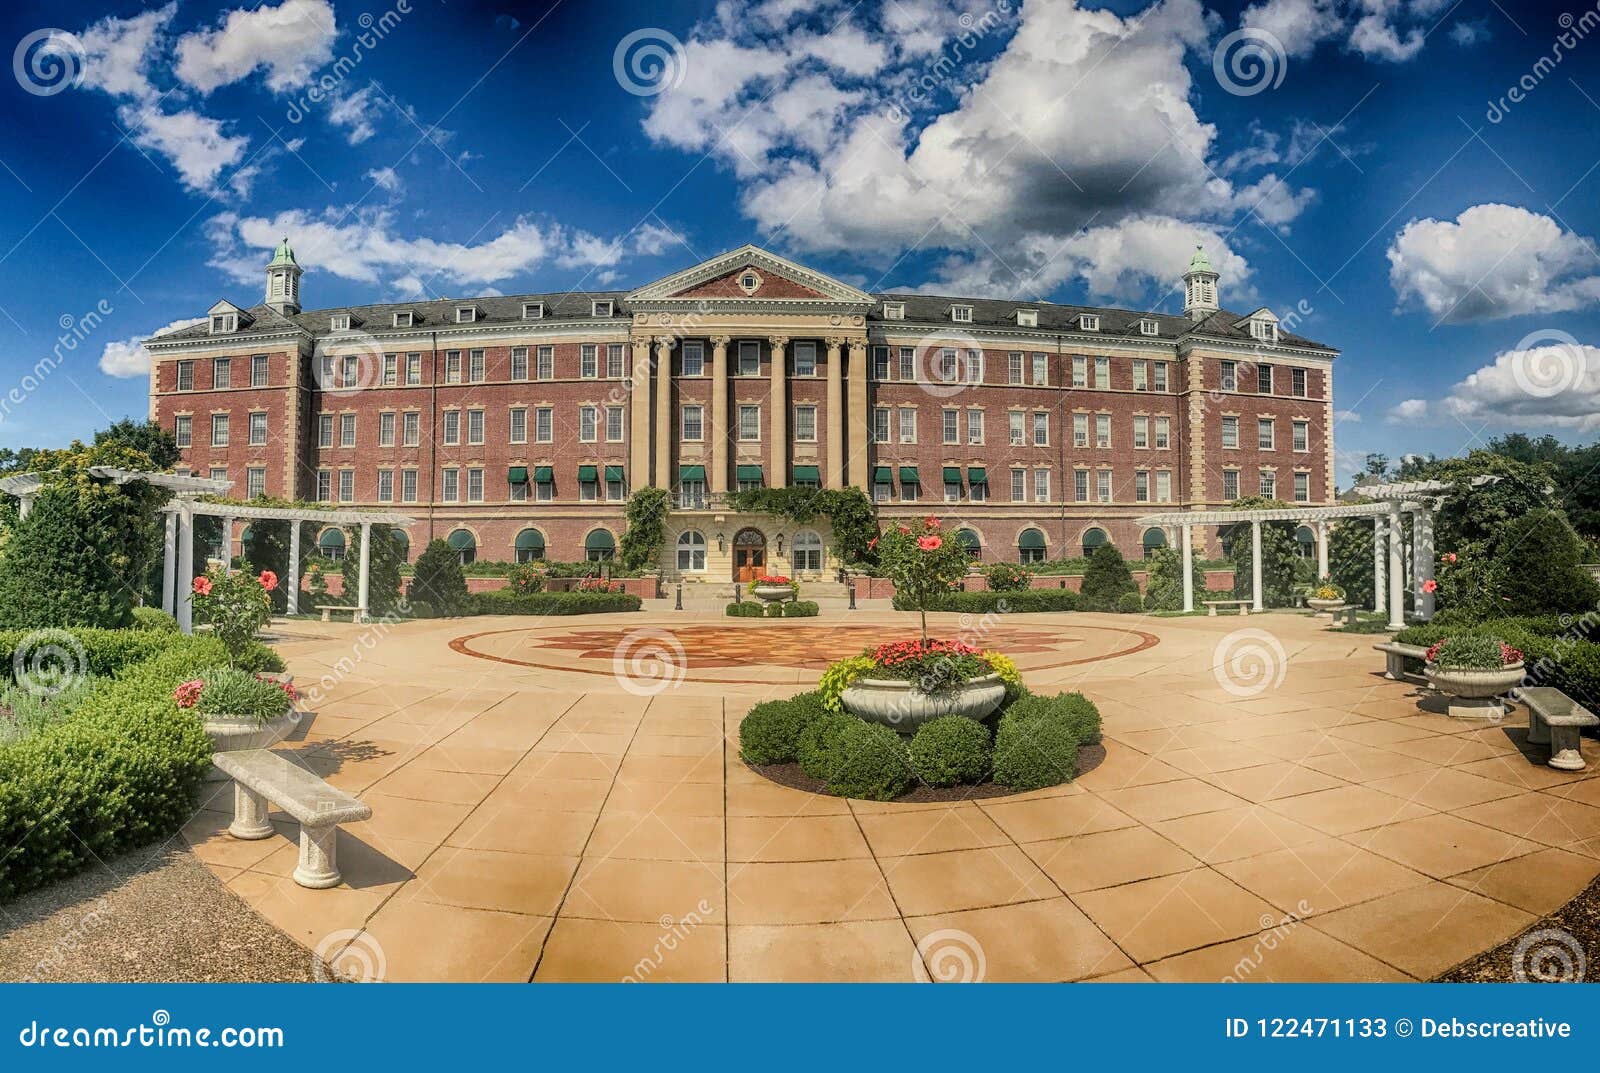 Culinary Institute Of America In New York Stock Image Image Of